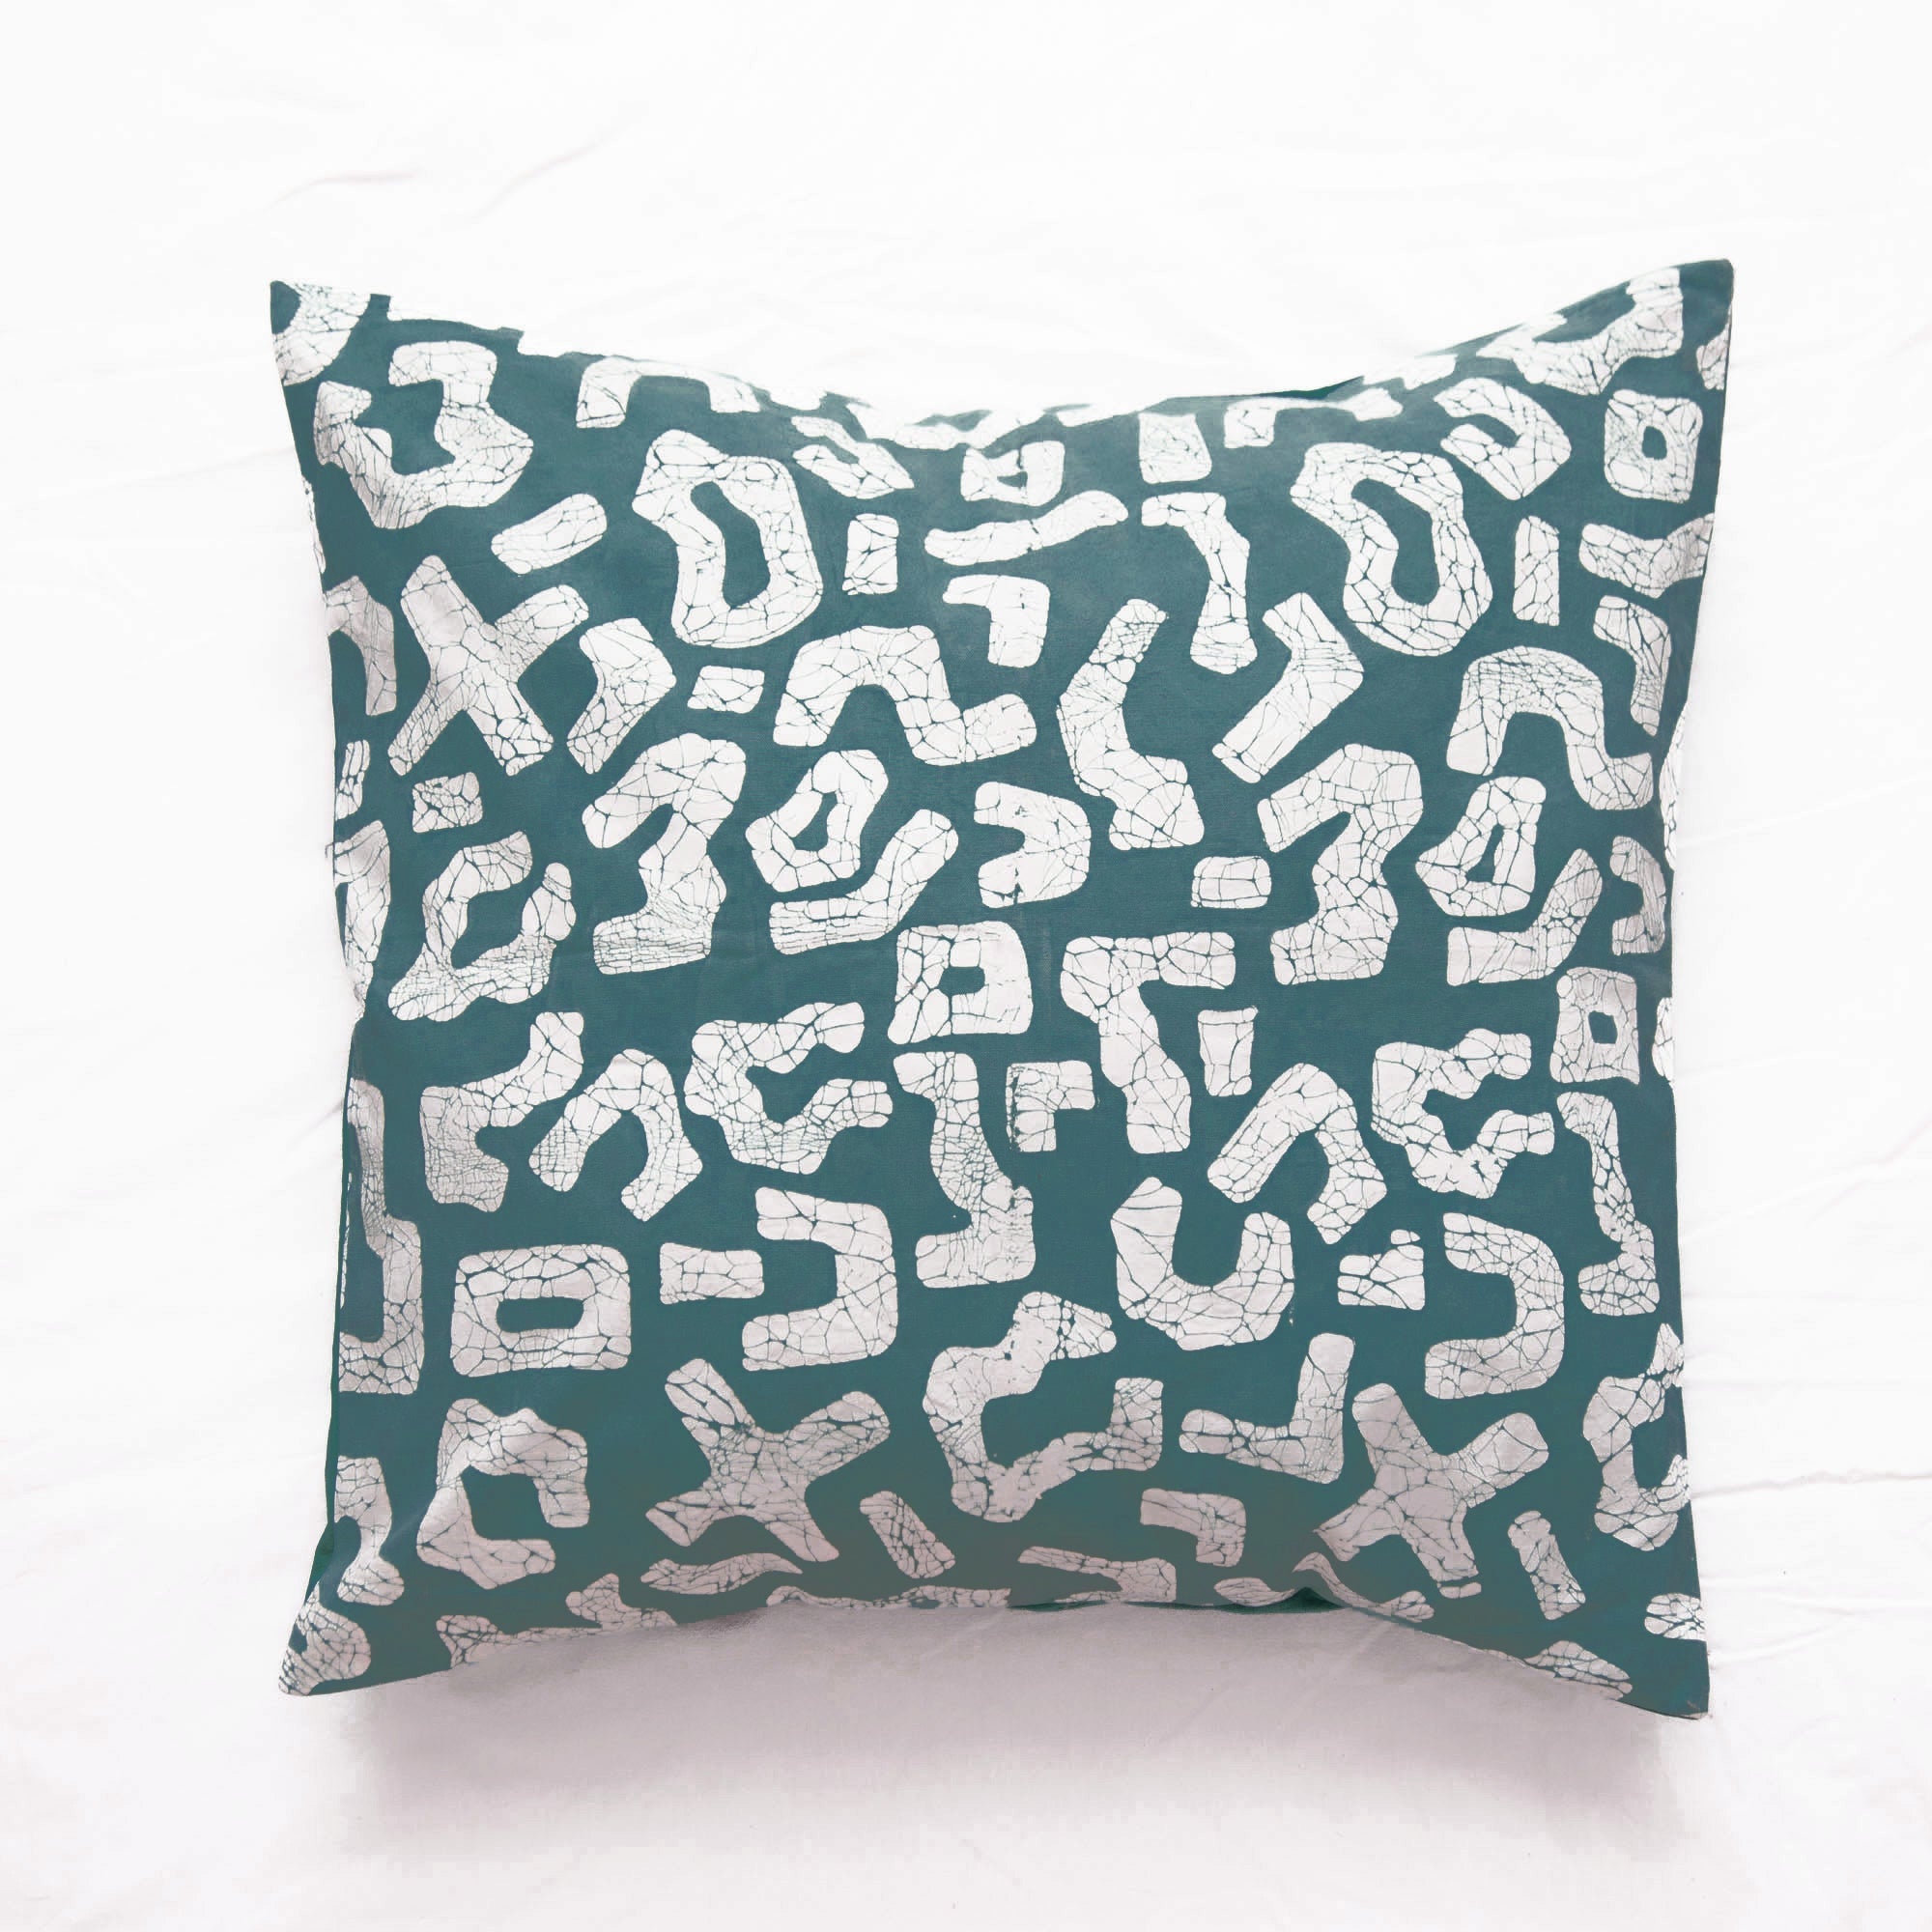 Hand-painted teal cushion cover, made from locally sourced fabrics to look good and do good.